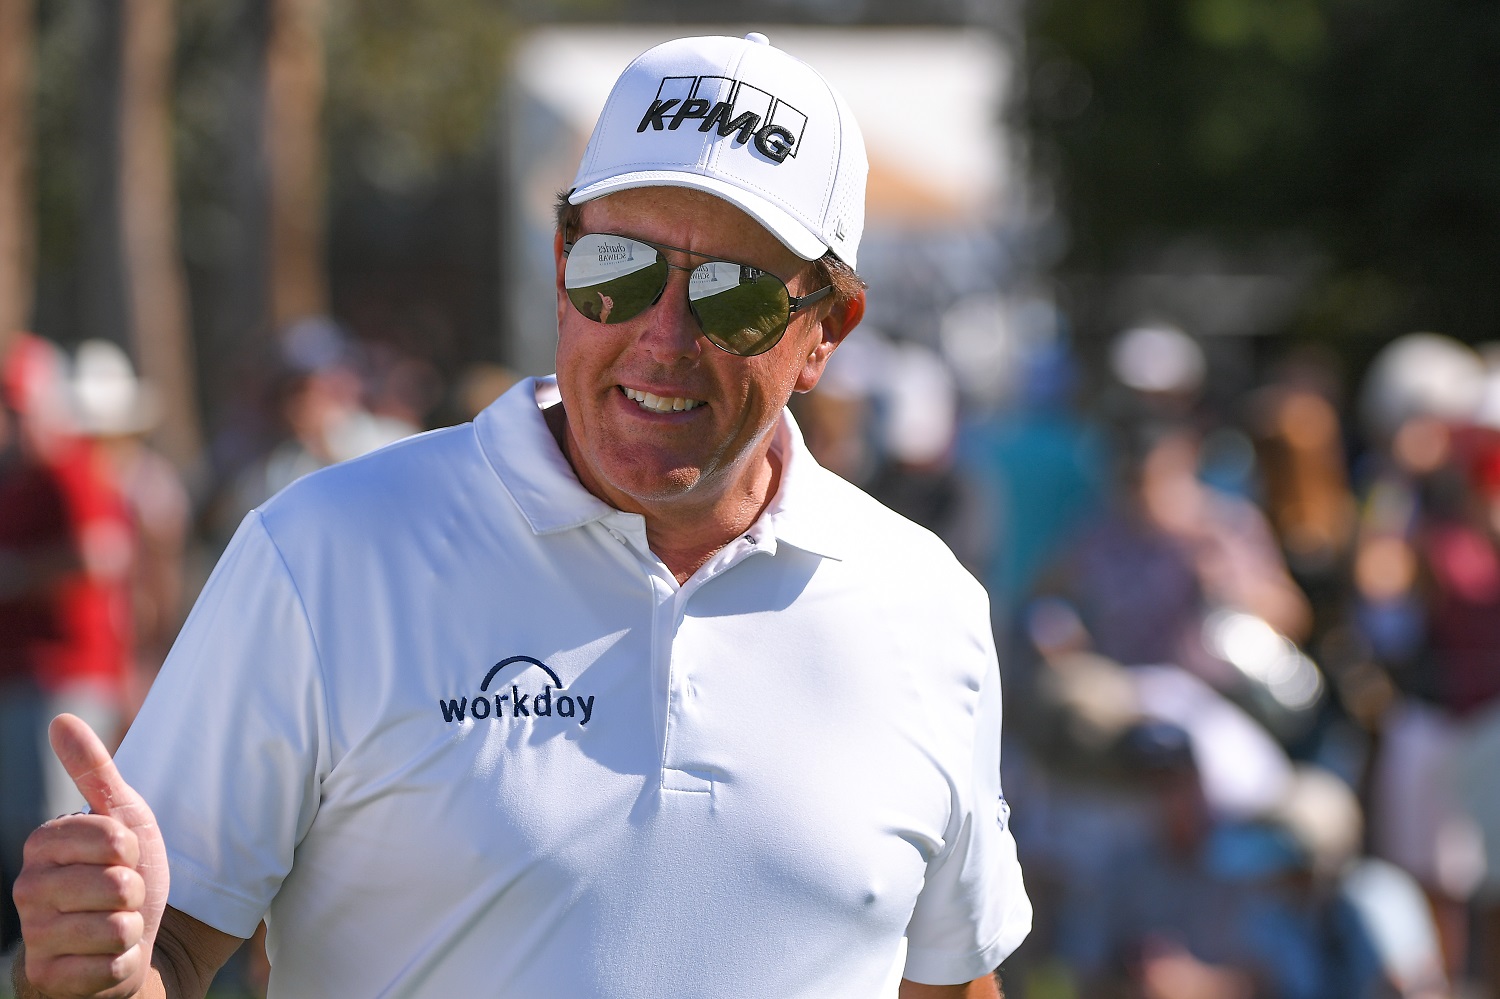 Phil Mickelson gives thumbs up while walking to the first tee box during the third round of the PGA Tour Champions Charles Schwab Cup Championship at Phoenix Country Club on Nov. 13, 2021. | Ben Jared/PGA Tour via Getty Images